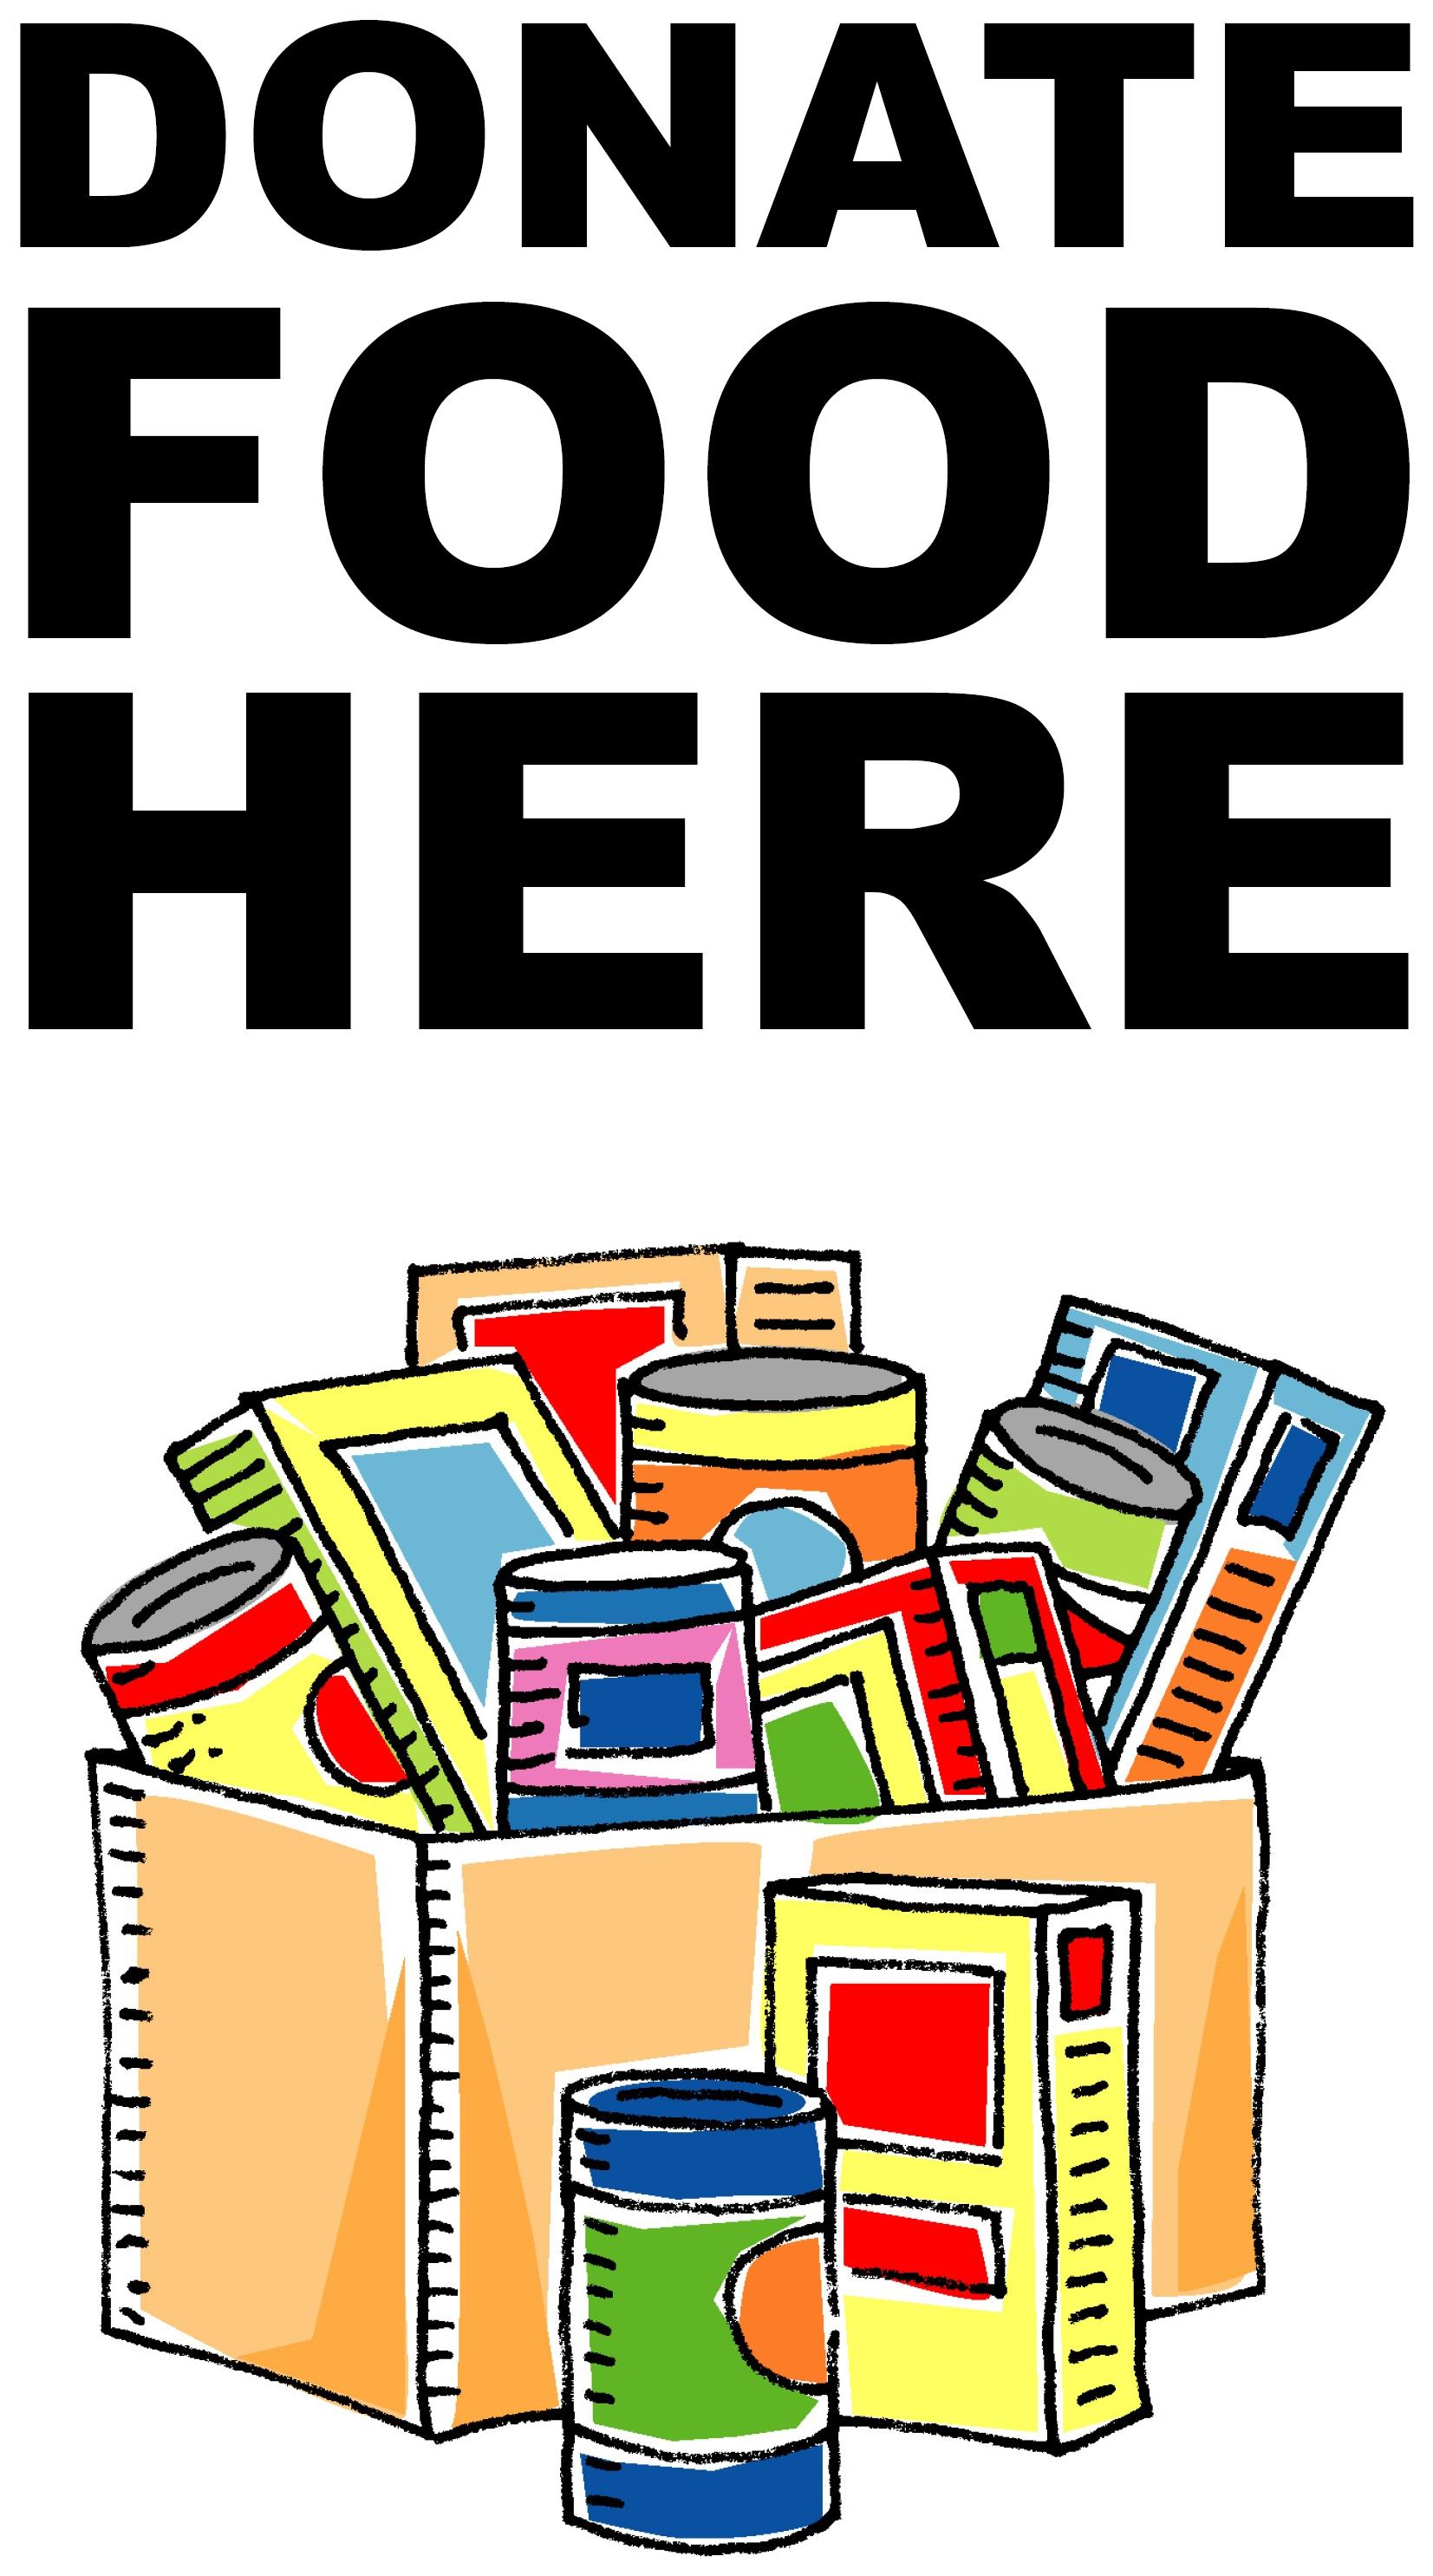 Canned Food Drive Slogans Can - Canned Food Clip Art